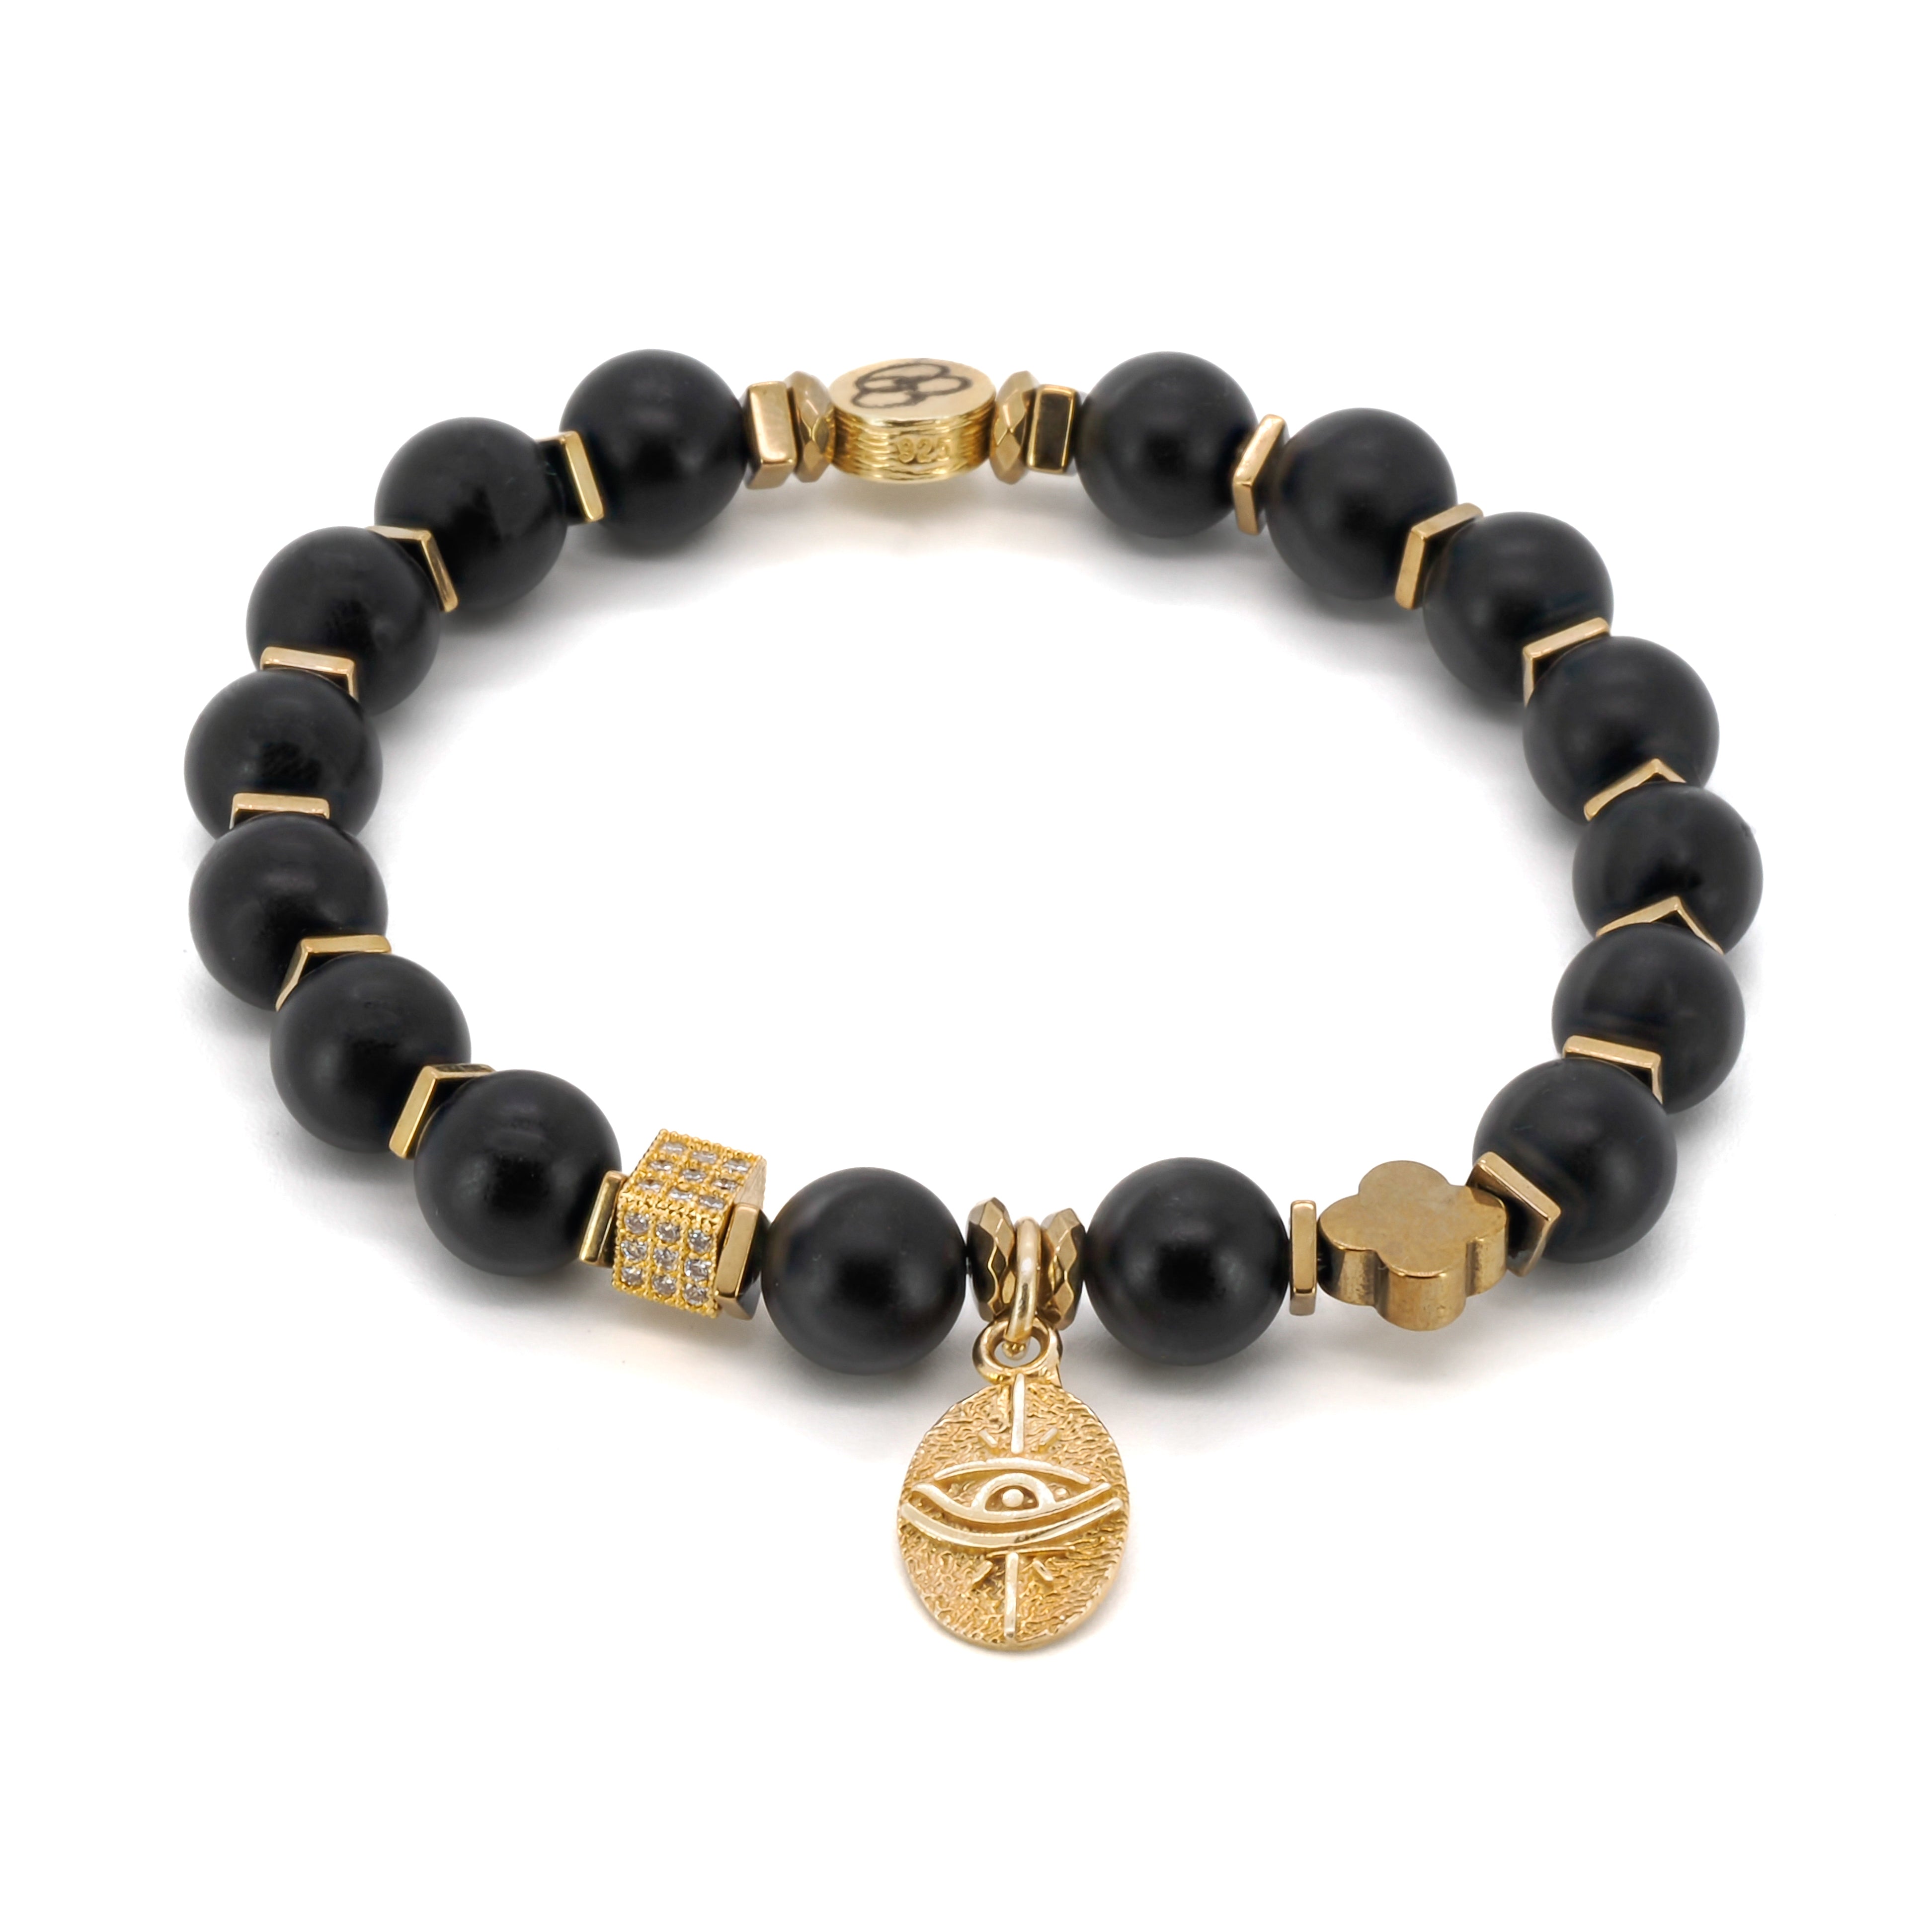 Discover the beauty and protection of the Onyx Unique Eye Bracelet, a stunning piece of handmade jewelry with meaningful elements.